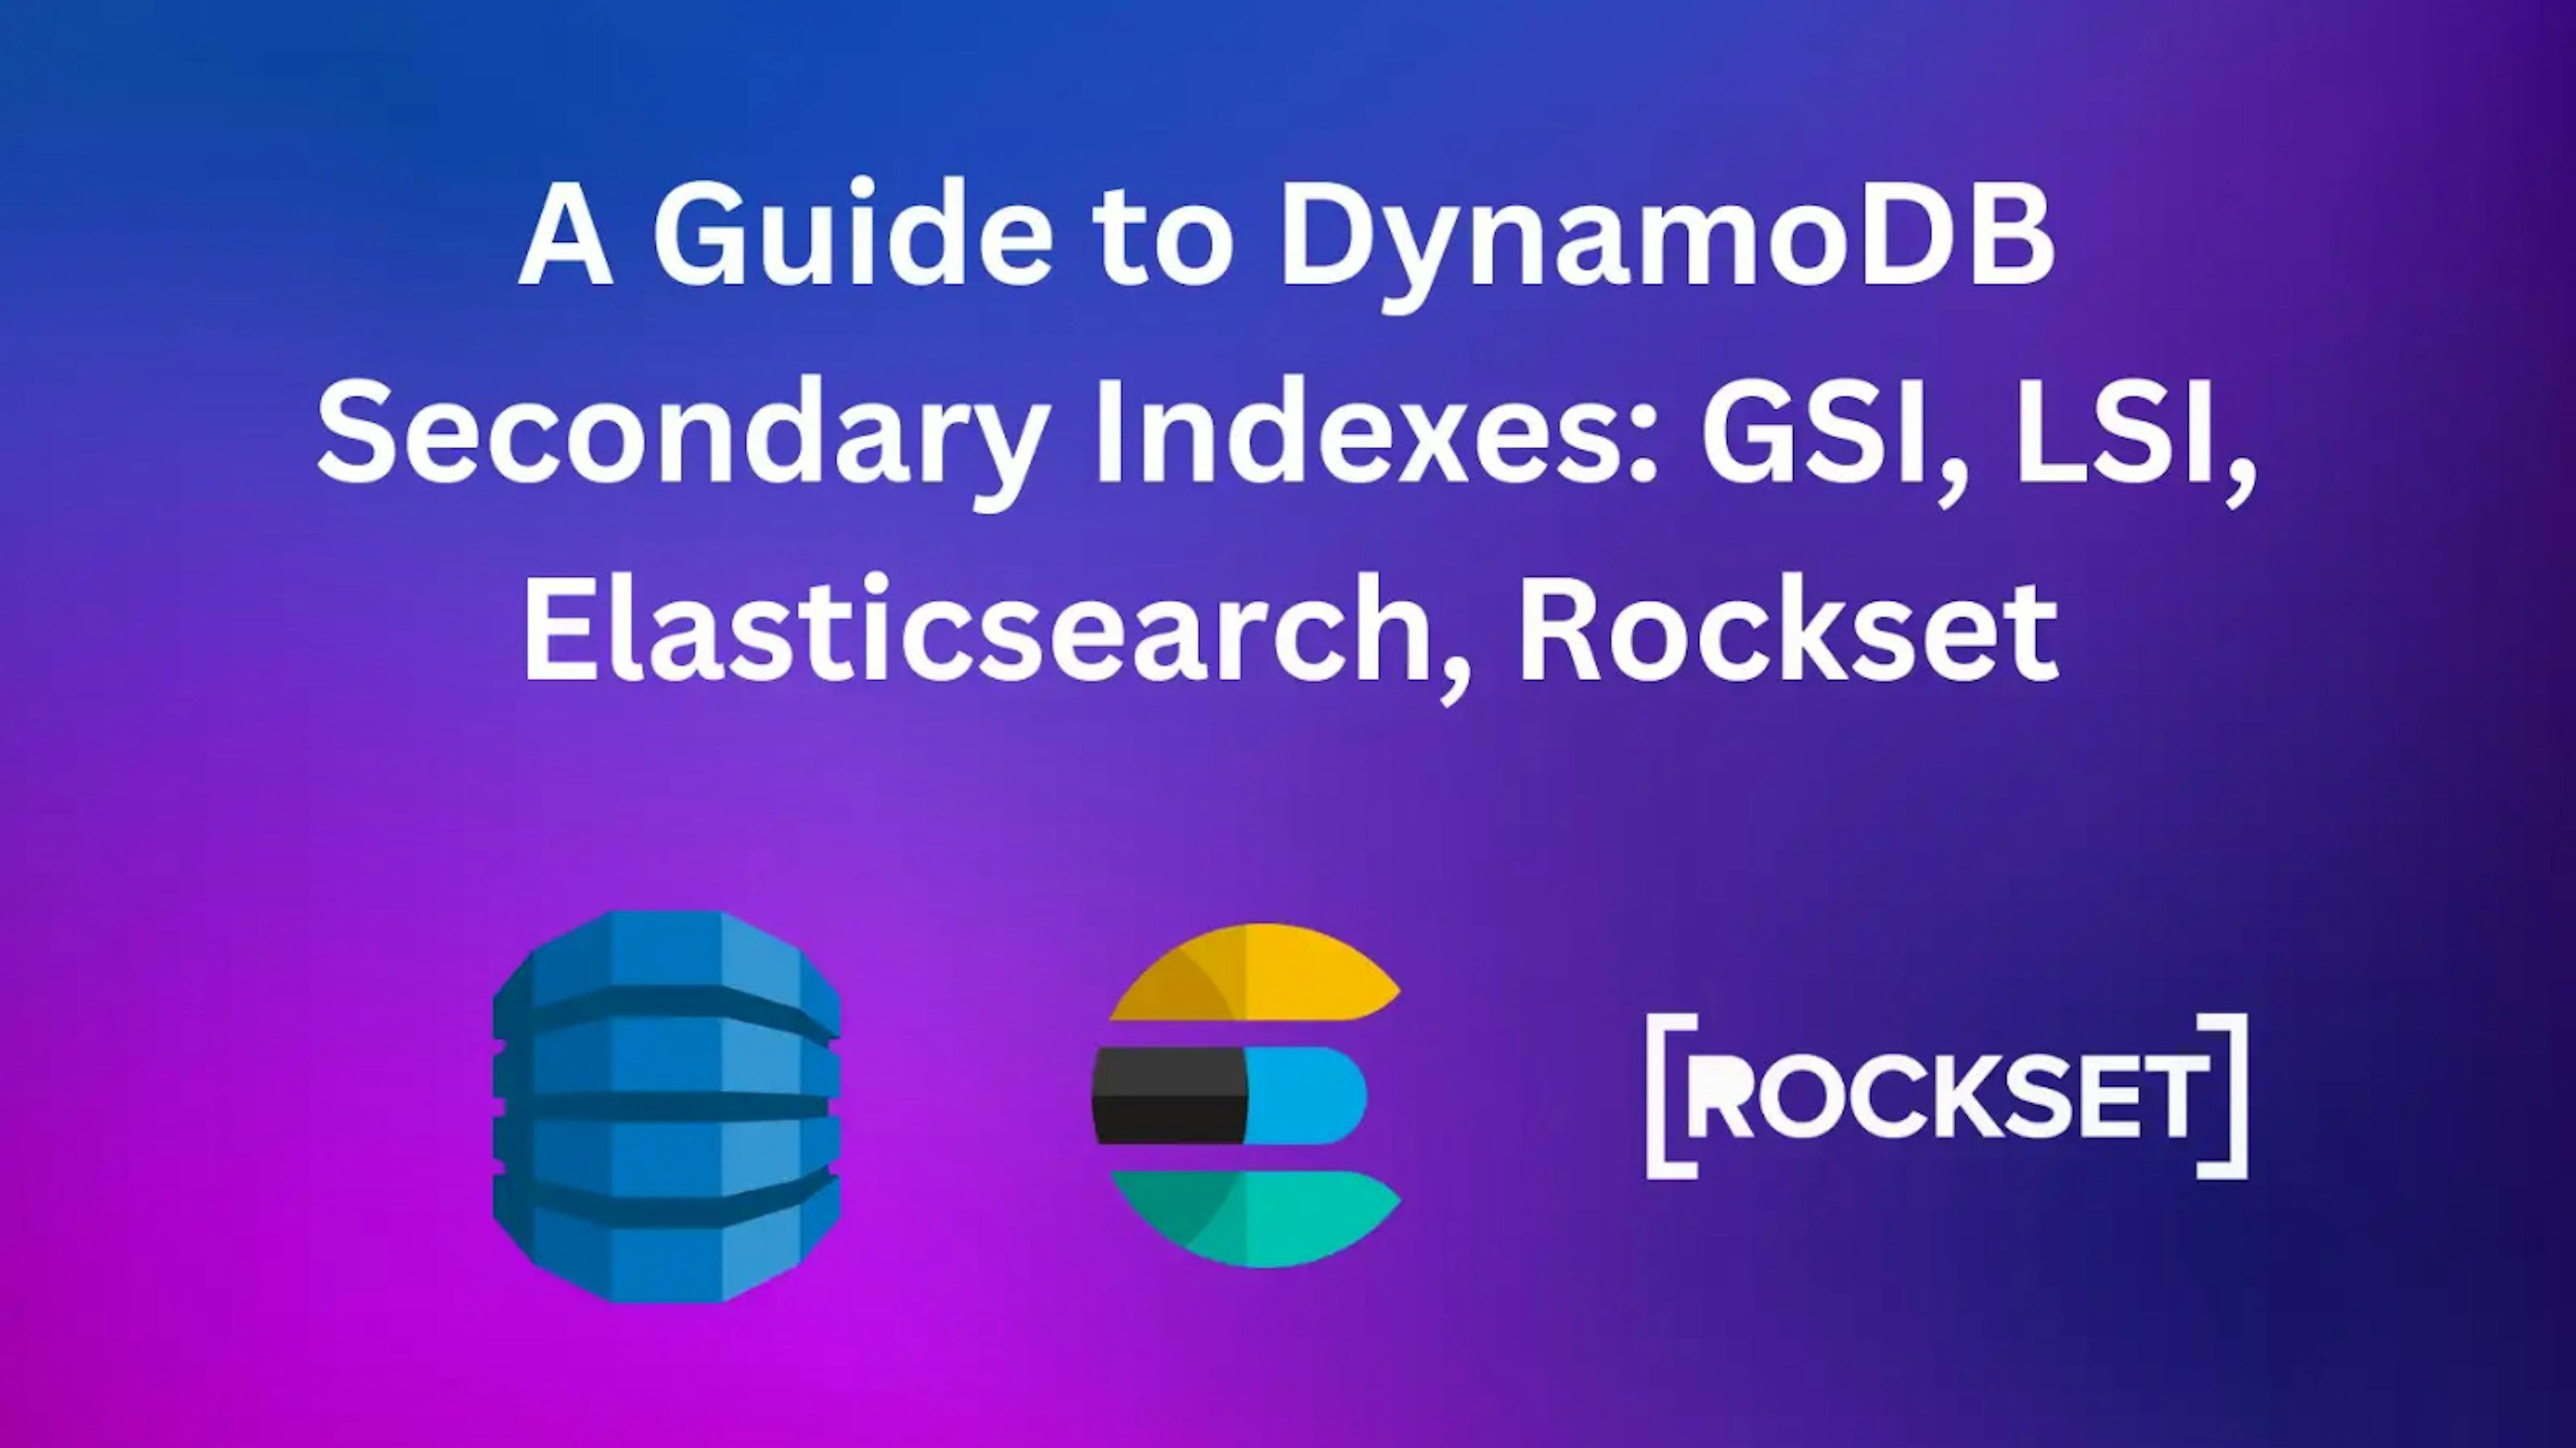 featured image - A Guide to DynamoDB Secondary Indexes: GSI, LSI, Elasticsearch and Rockset